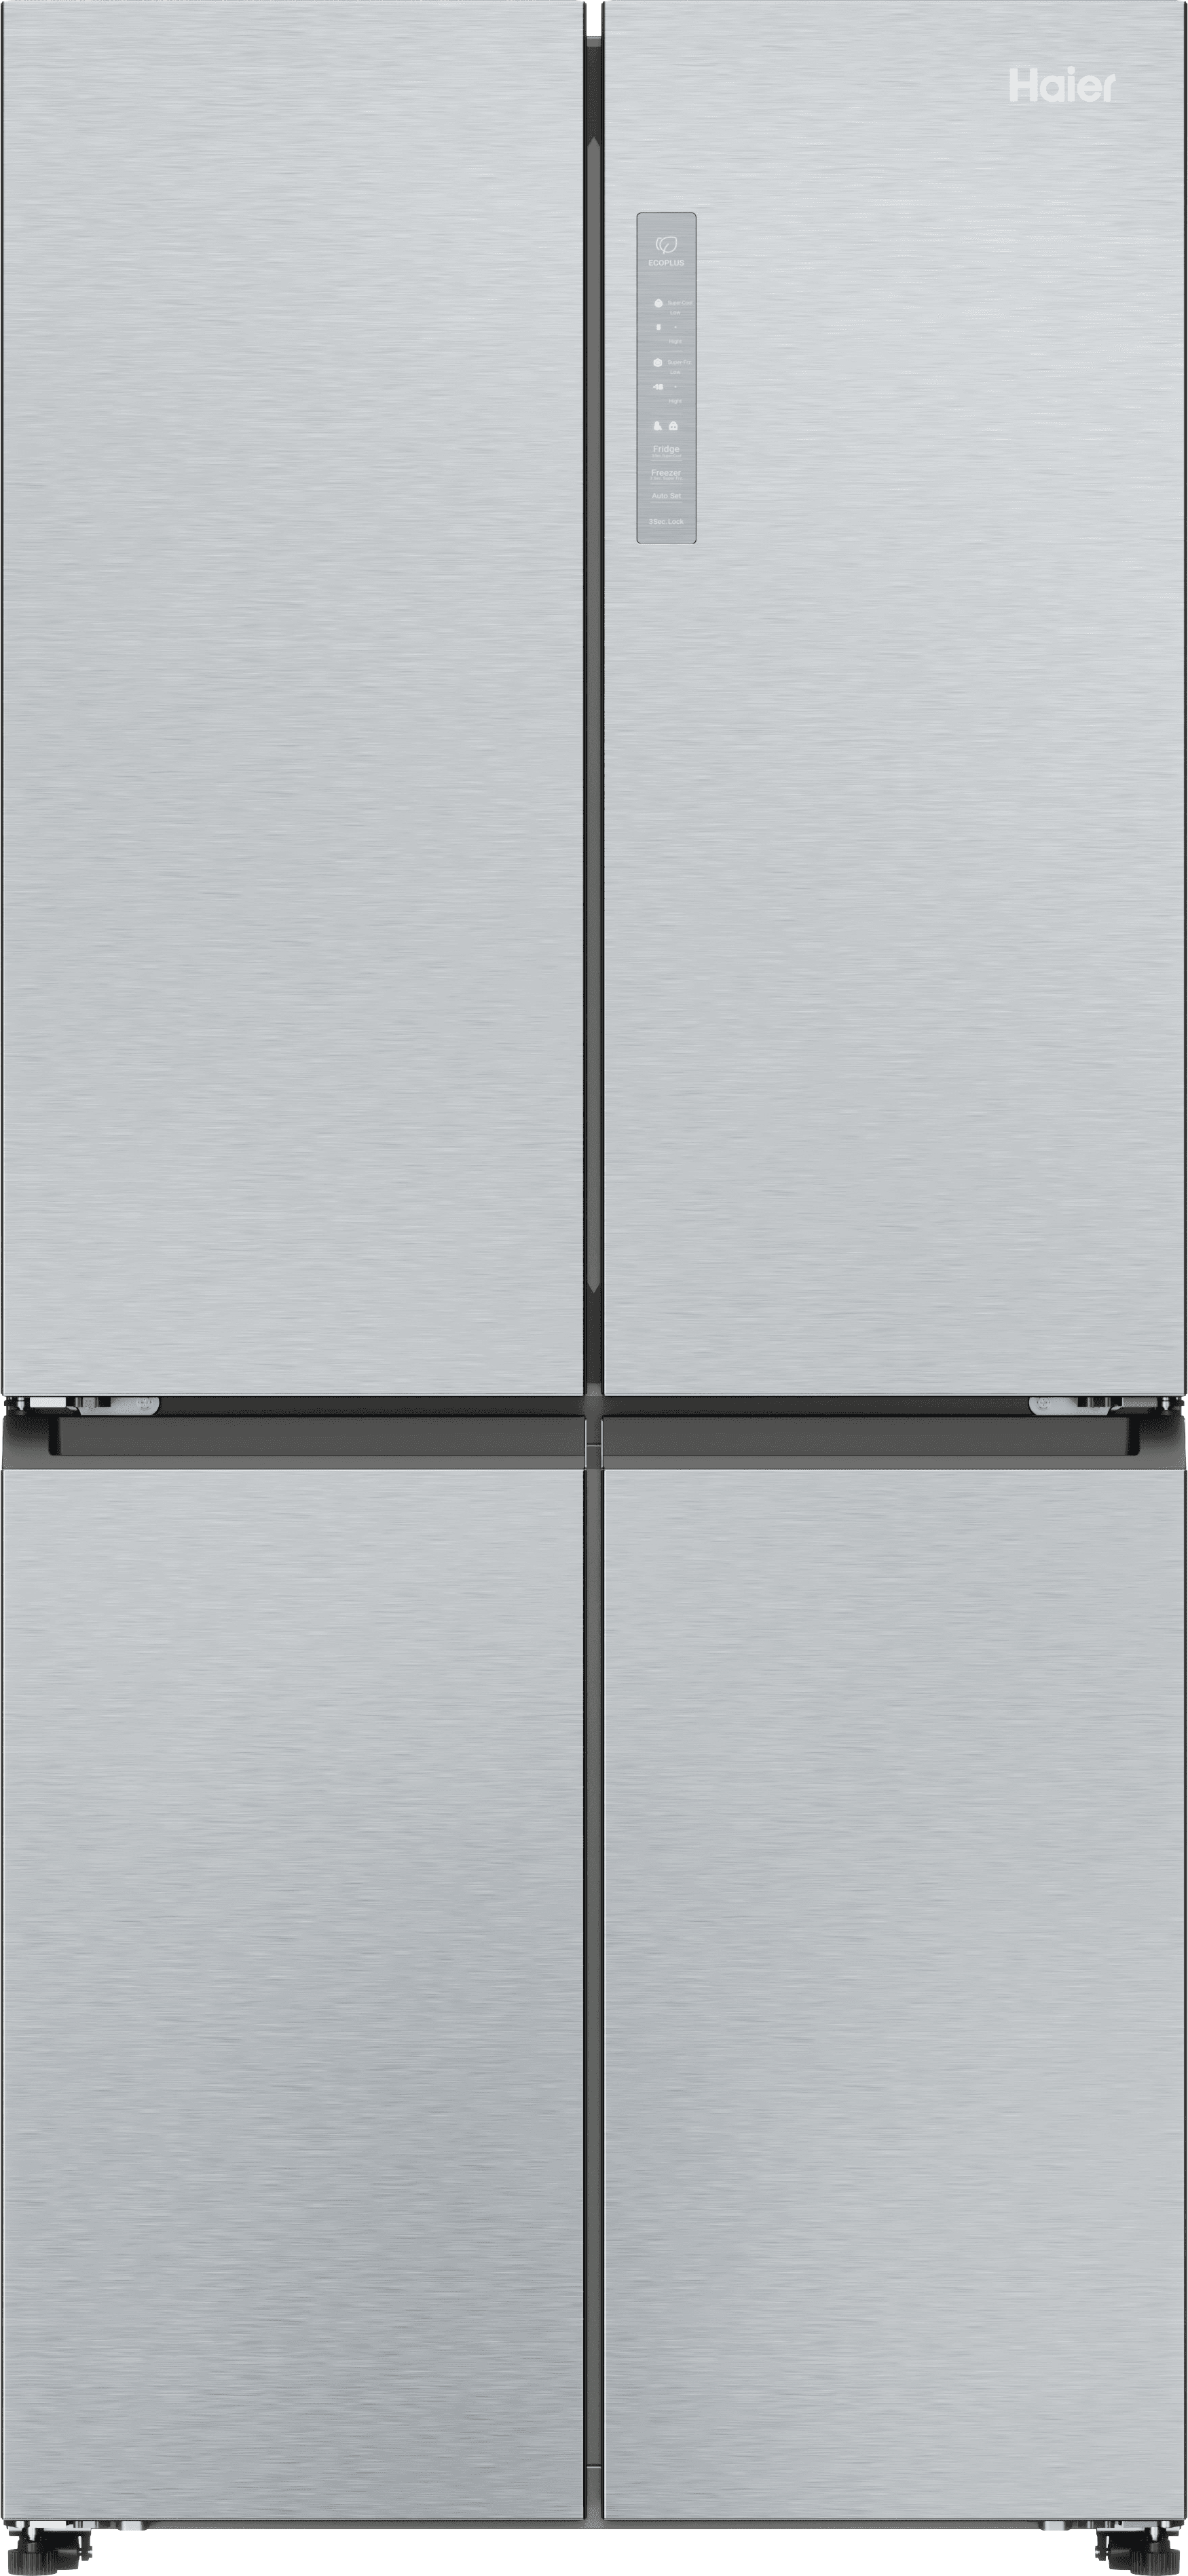 Haier Cube 83 Serie 3 HCR3818ENMG Total No Frost American Fridge Freezer - Silver - E Rated, Silver